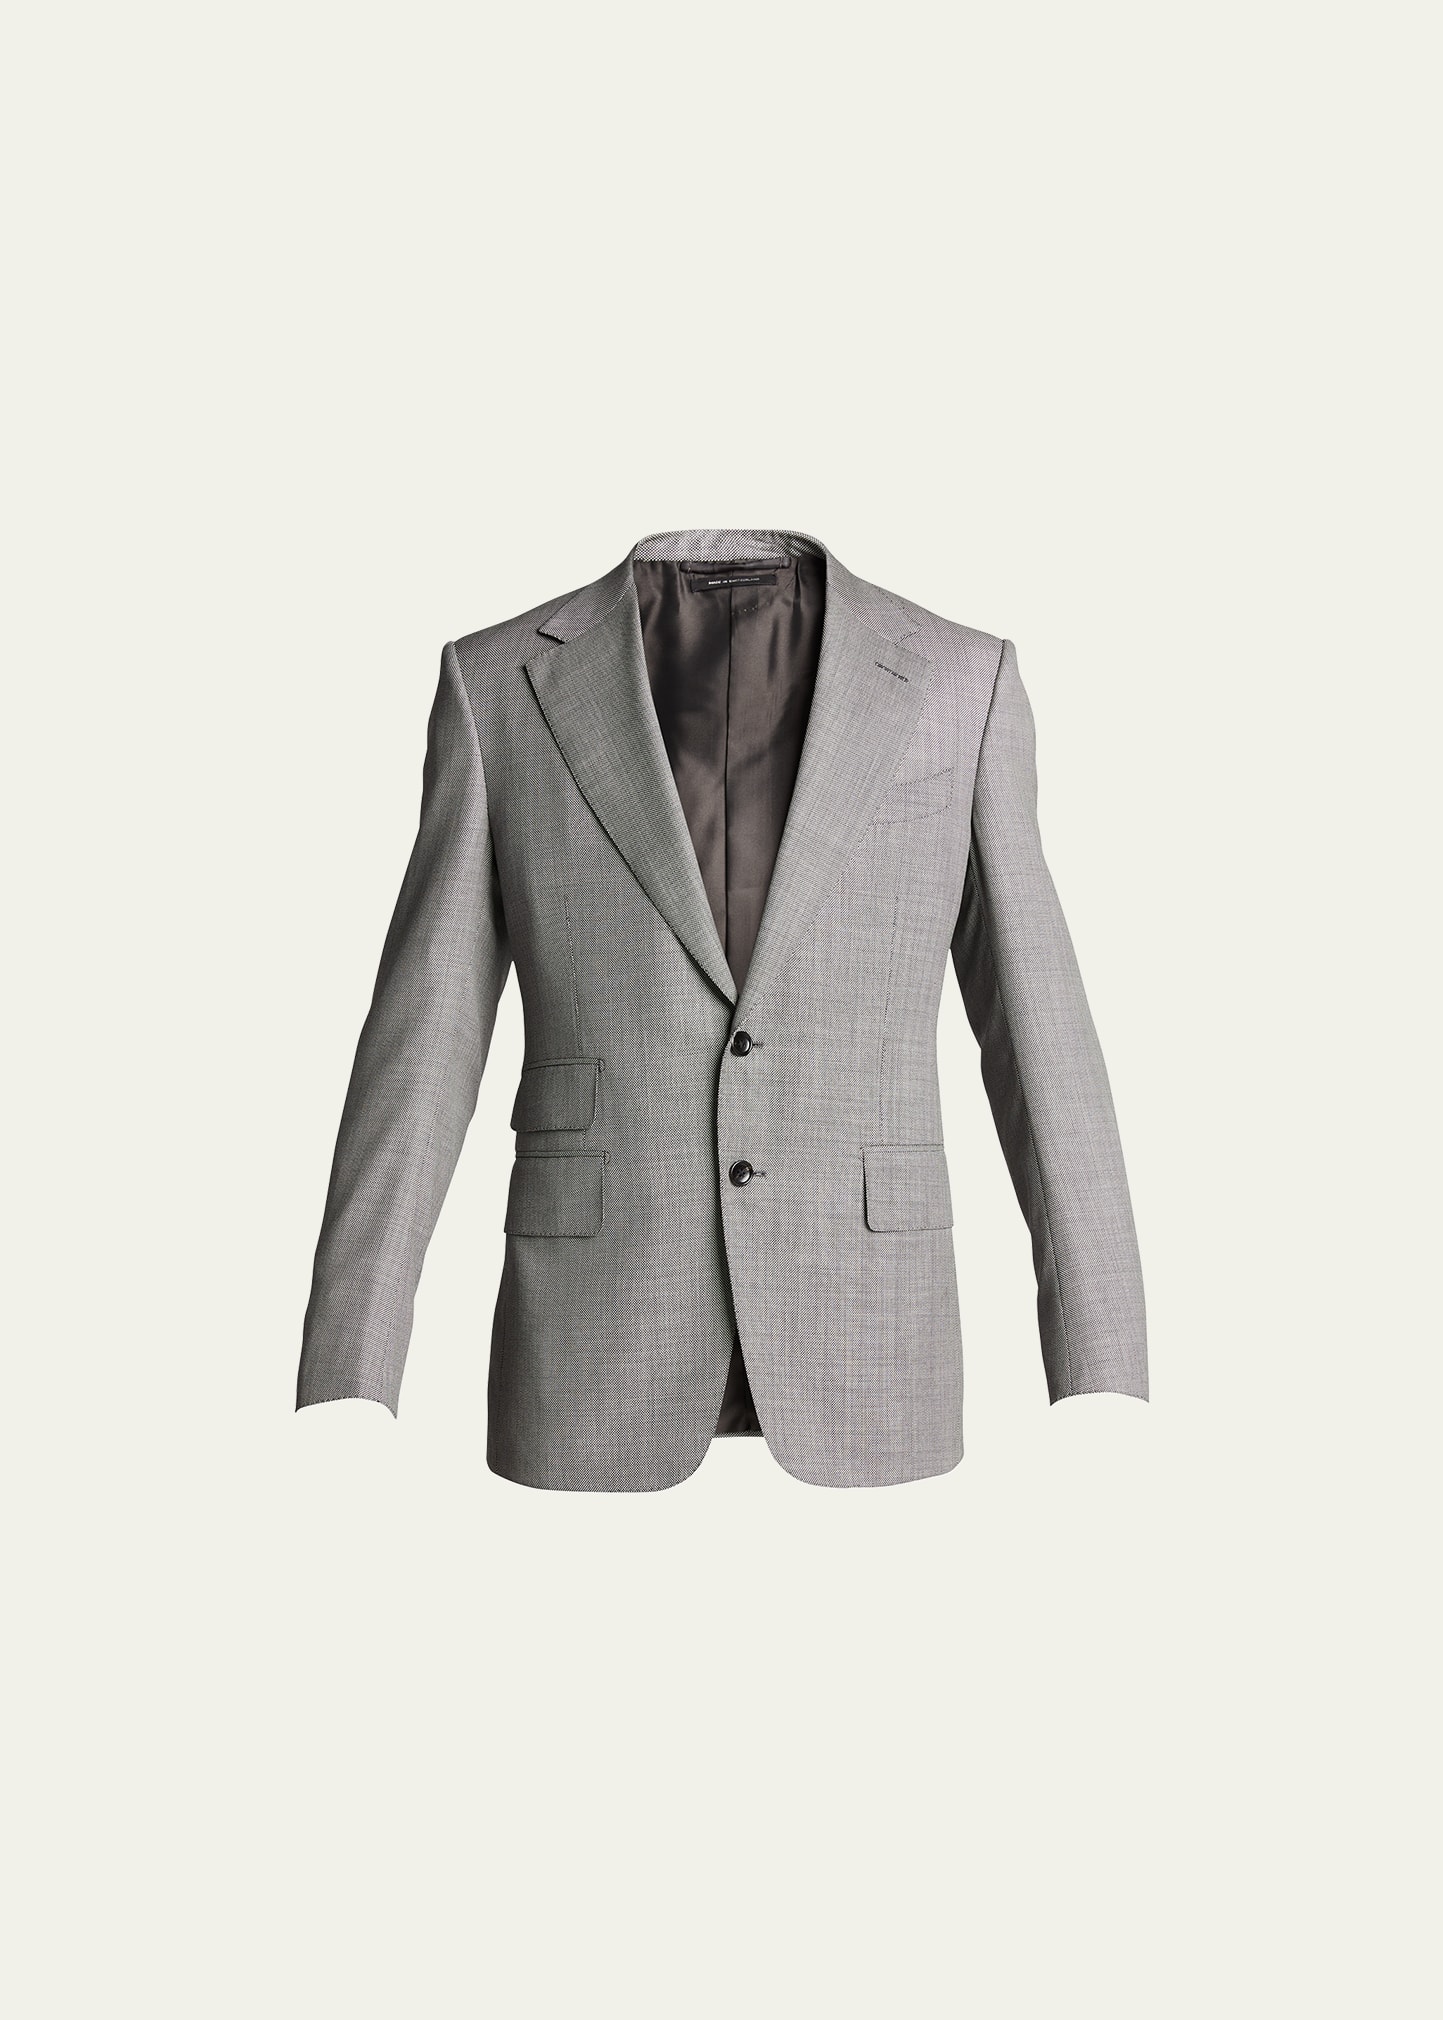 TOM FORD Men's Solid Wool Two-Piece Suit | Smart Closet